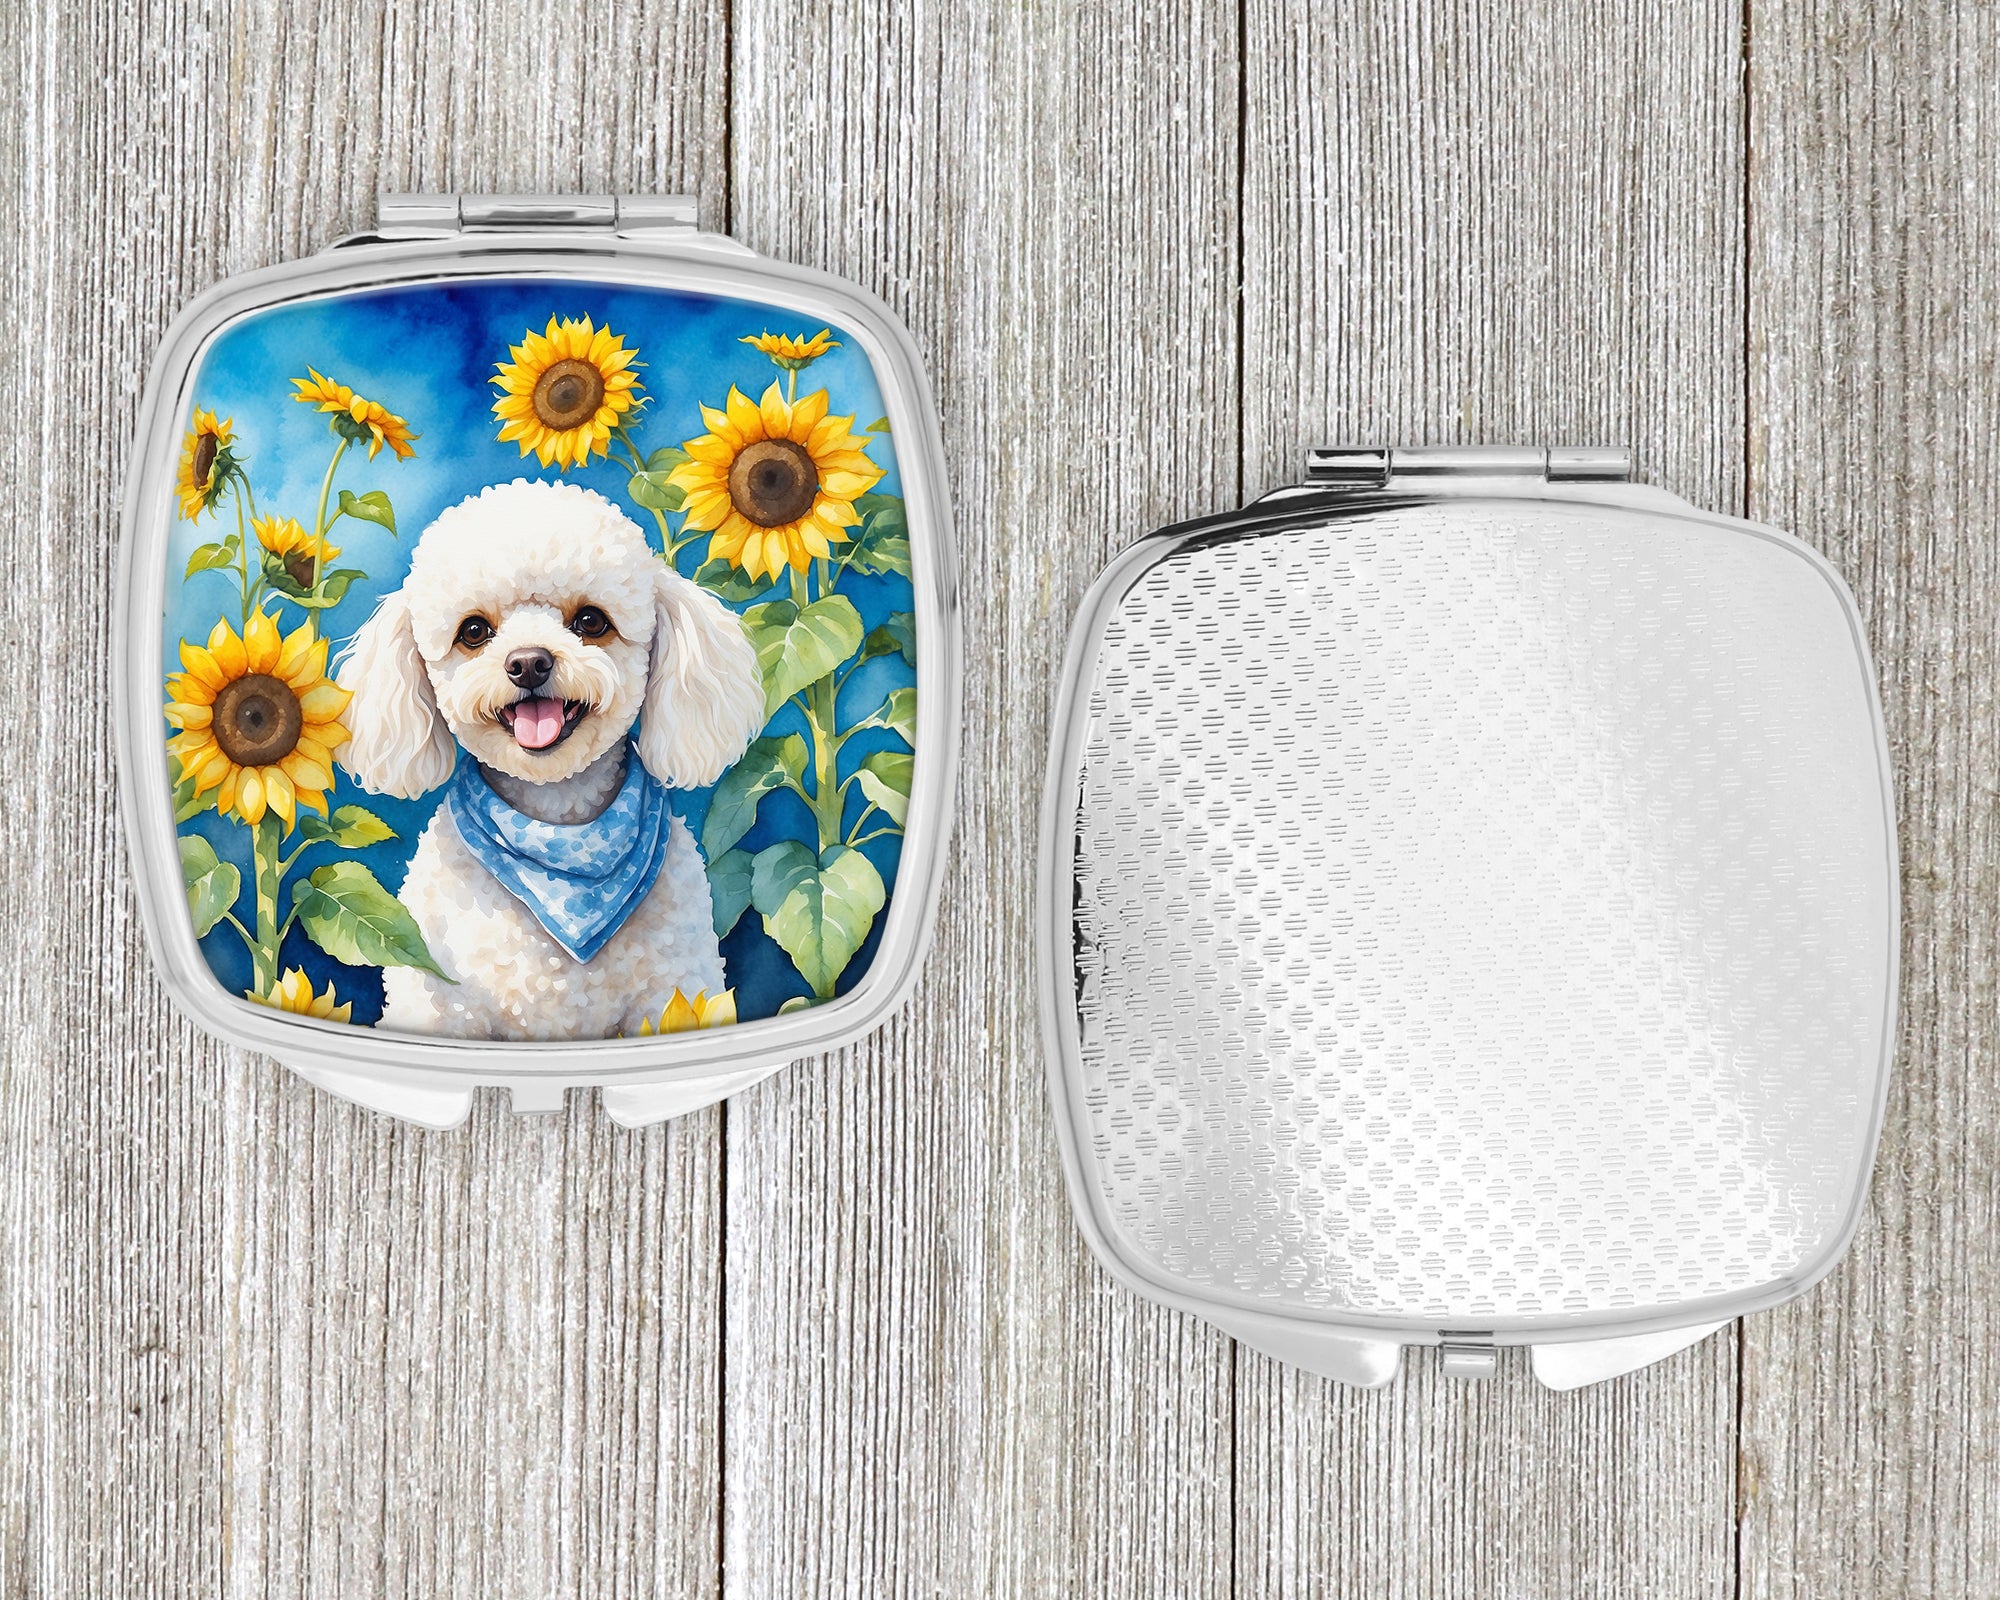 White Poodle in Sunflowers Compact Mirror